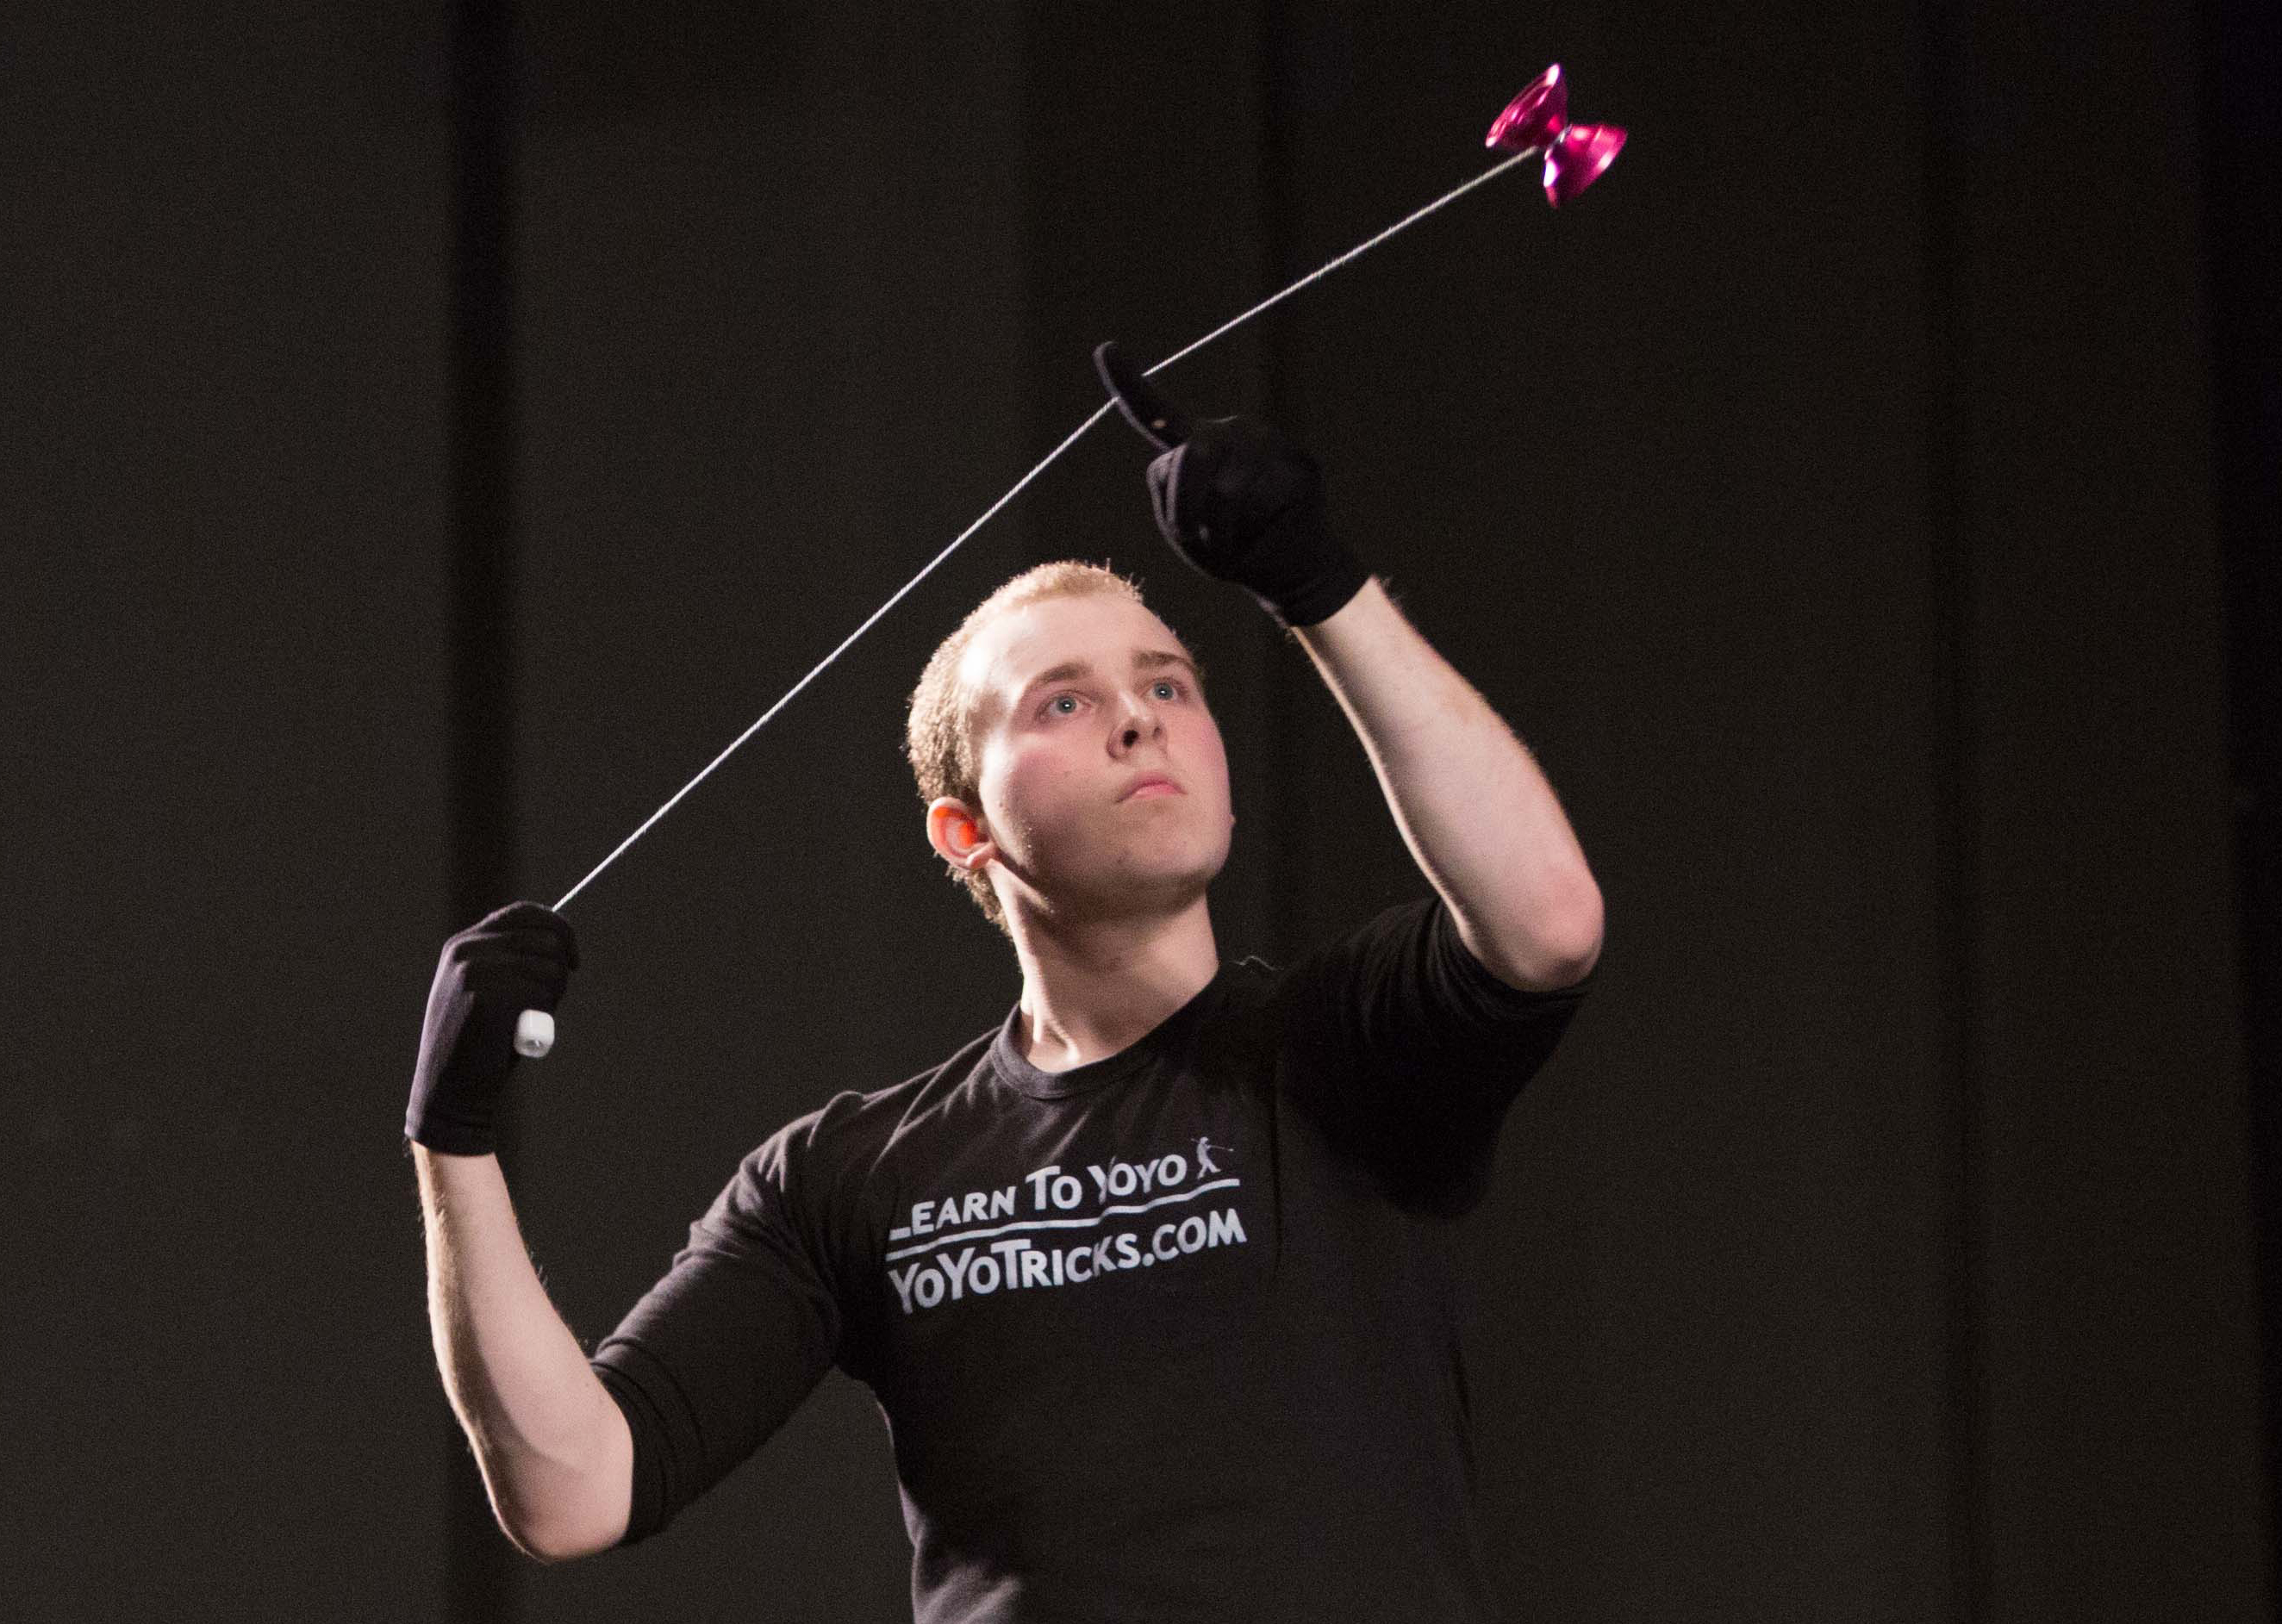 Snuble Krønike Besiddelse US Player Wins World Yoyo Contest with Crazy “Off-Hand” Style Play